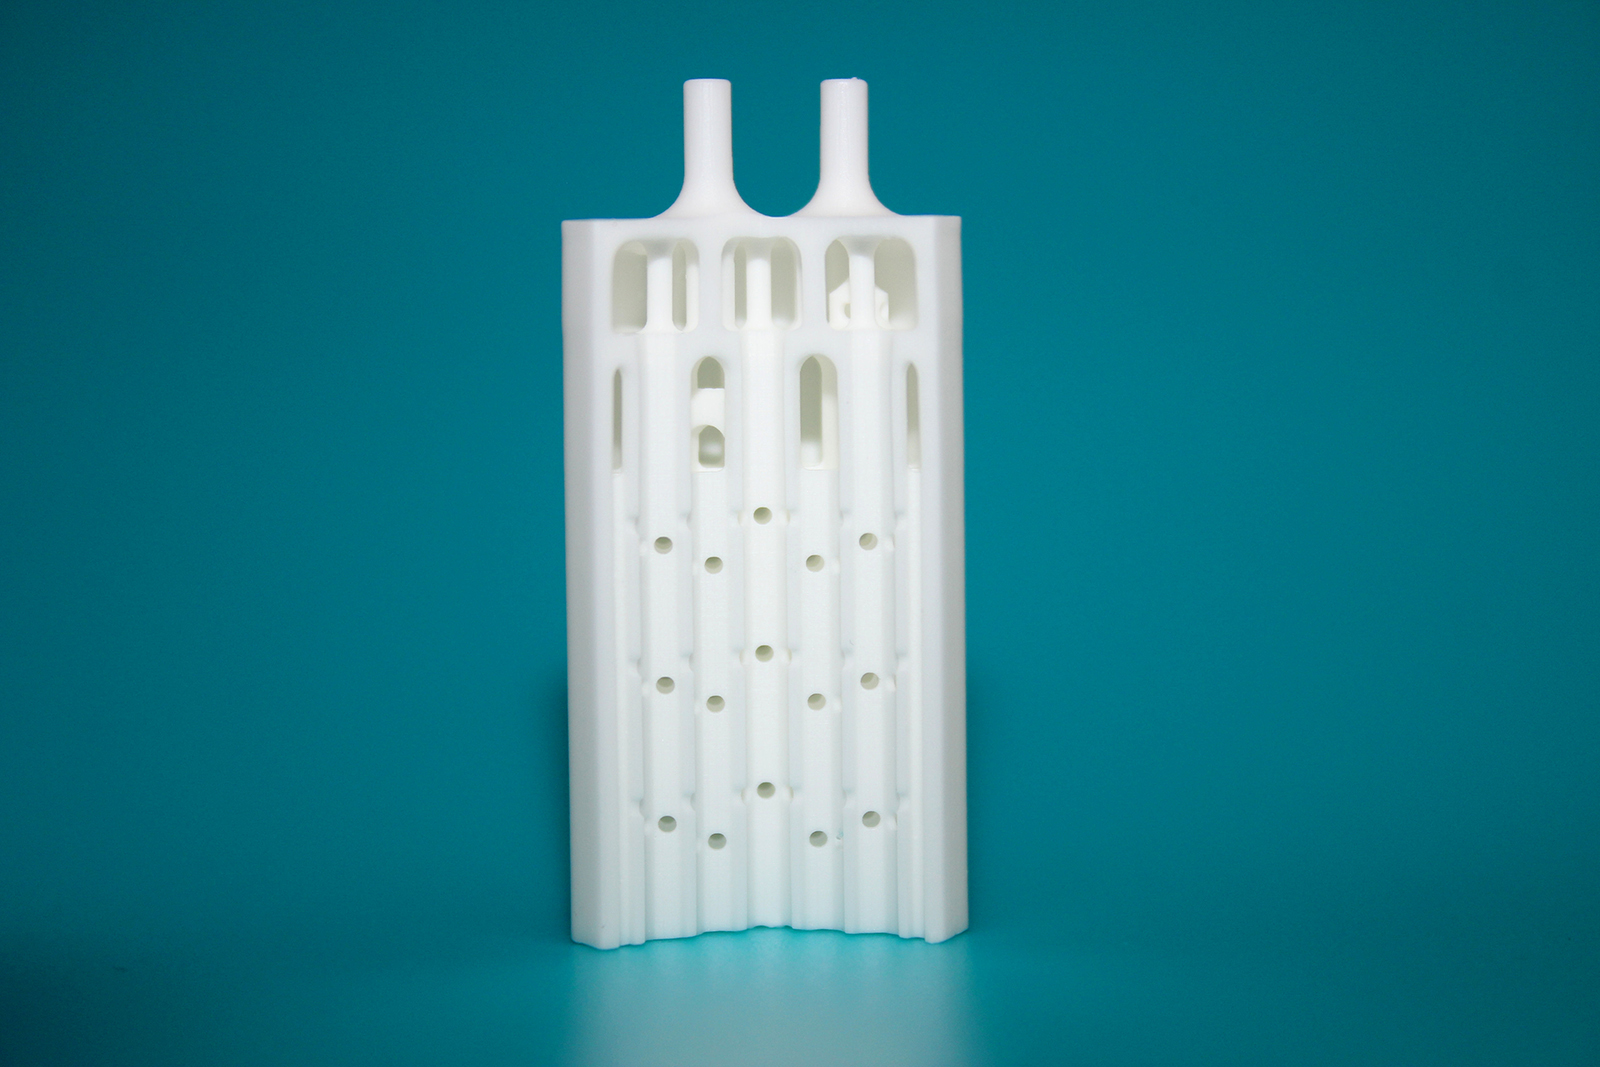 Cut through a ceramic microreactor which was manufactured additively: the complex channels as well as the fluidic connections at the top were printed together with the whole component.